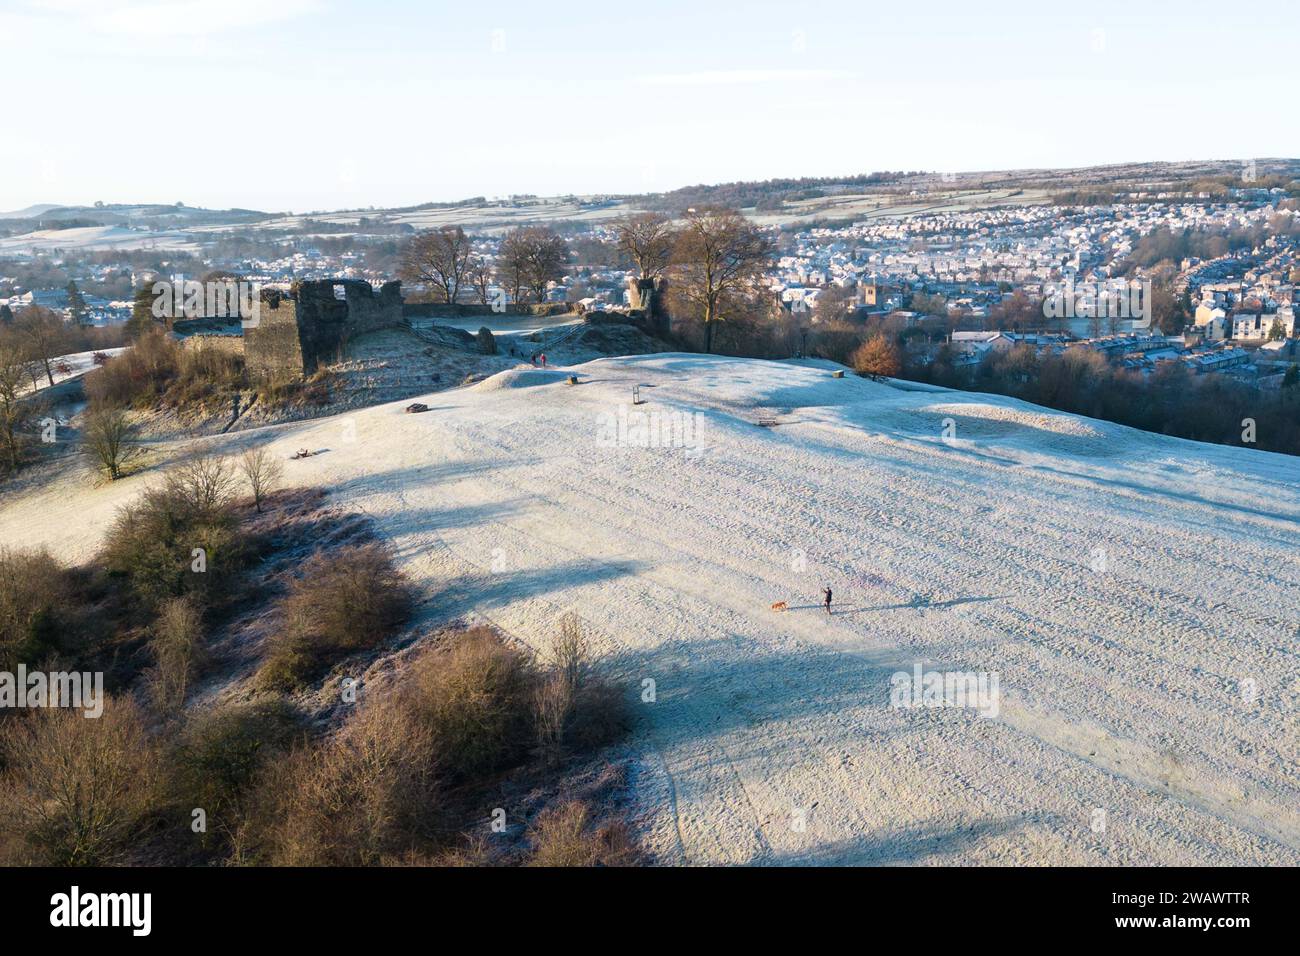 Kendal, Cumbria, January 7th 2024 - A night of mist and sub-zero temperatures brought a beautiful Wintry morning frost to the town of Kendal in Cumbria on Sunday. Kendal Castle which overlooks the Medieval town was surrounded by a white icey layer as dog walkers enjoyed the view. Houses at the foot of the castle are shaped in circles and ovals also caught the frost. Credit: Stop Press Media/Alamy Live News Stock Photo